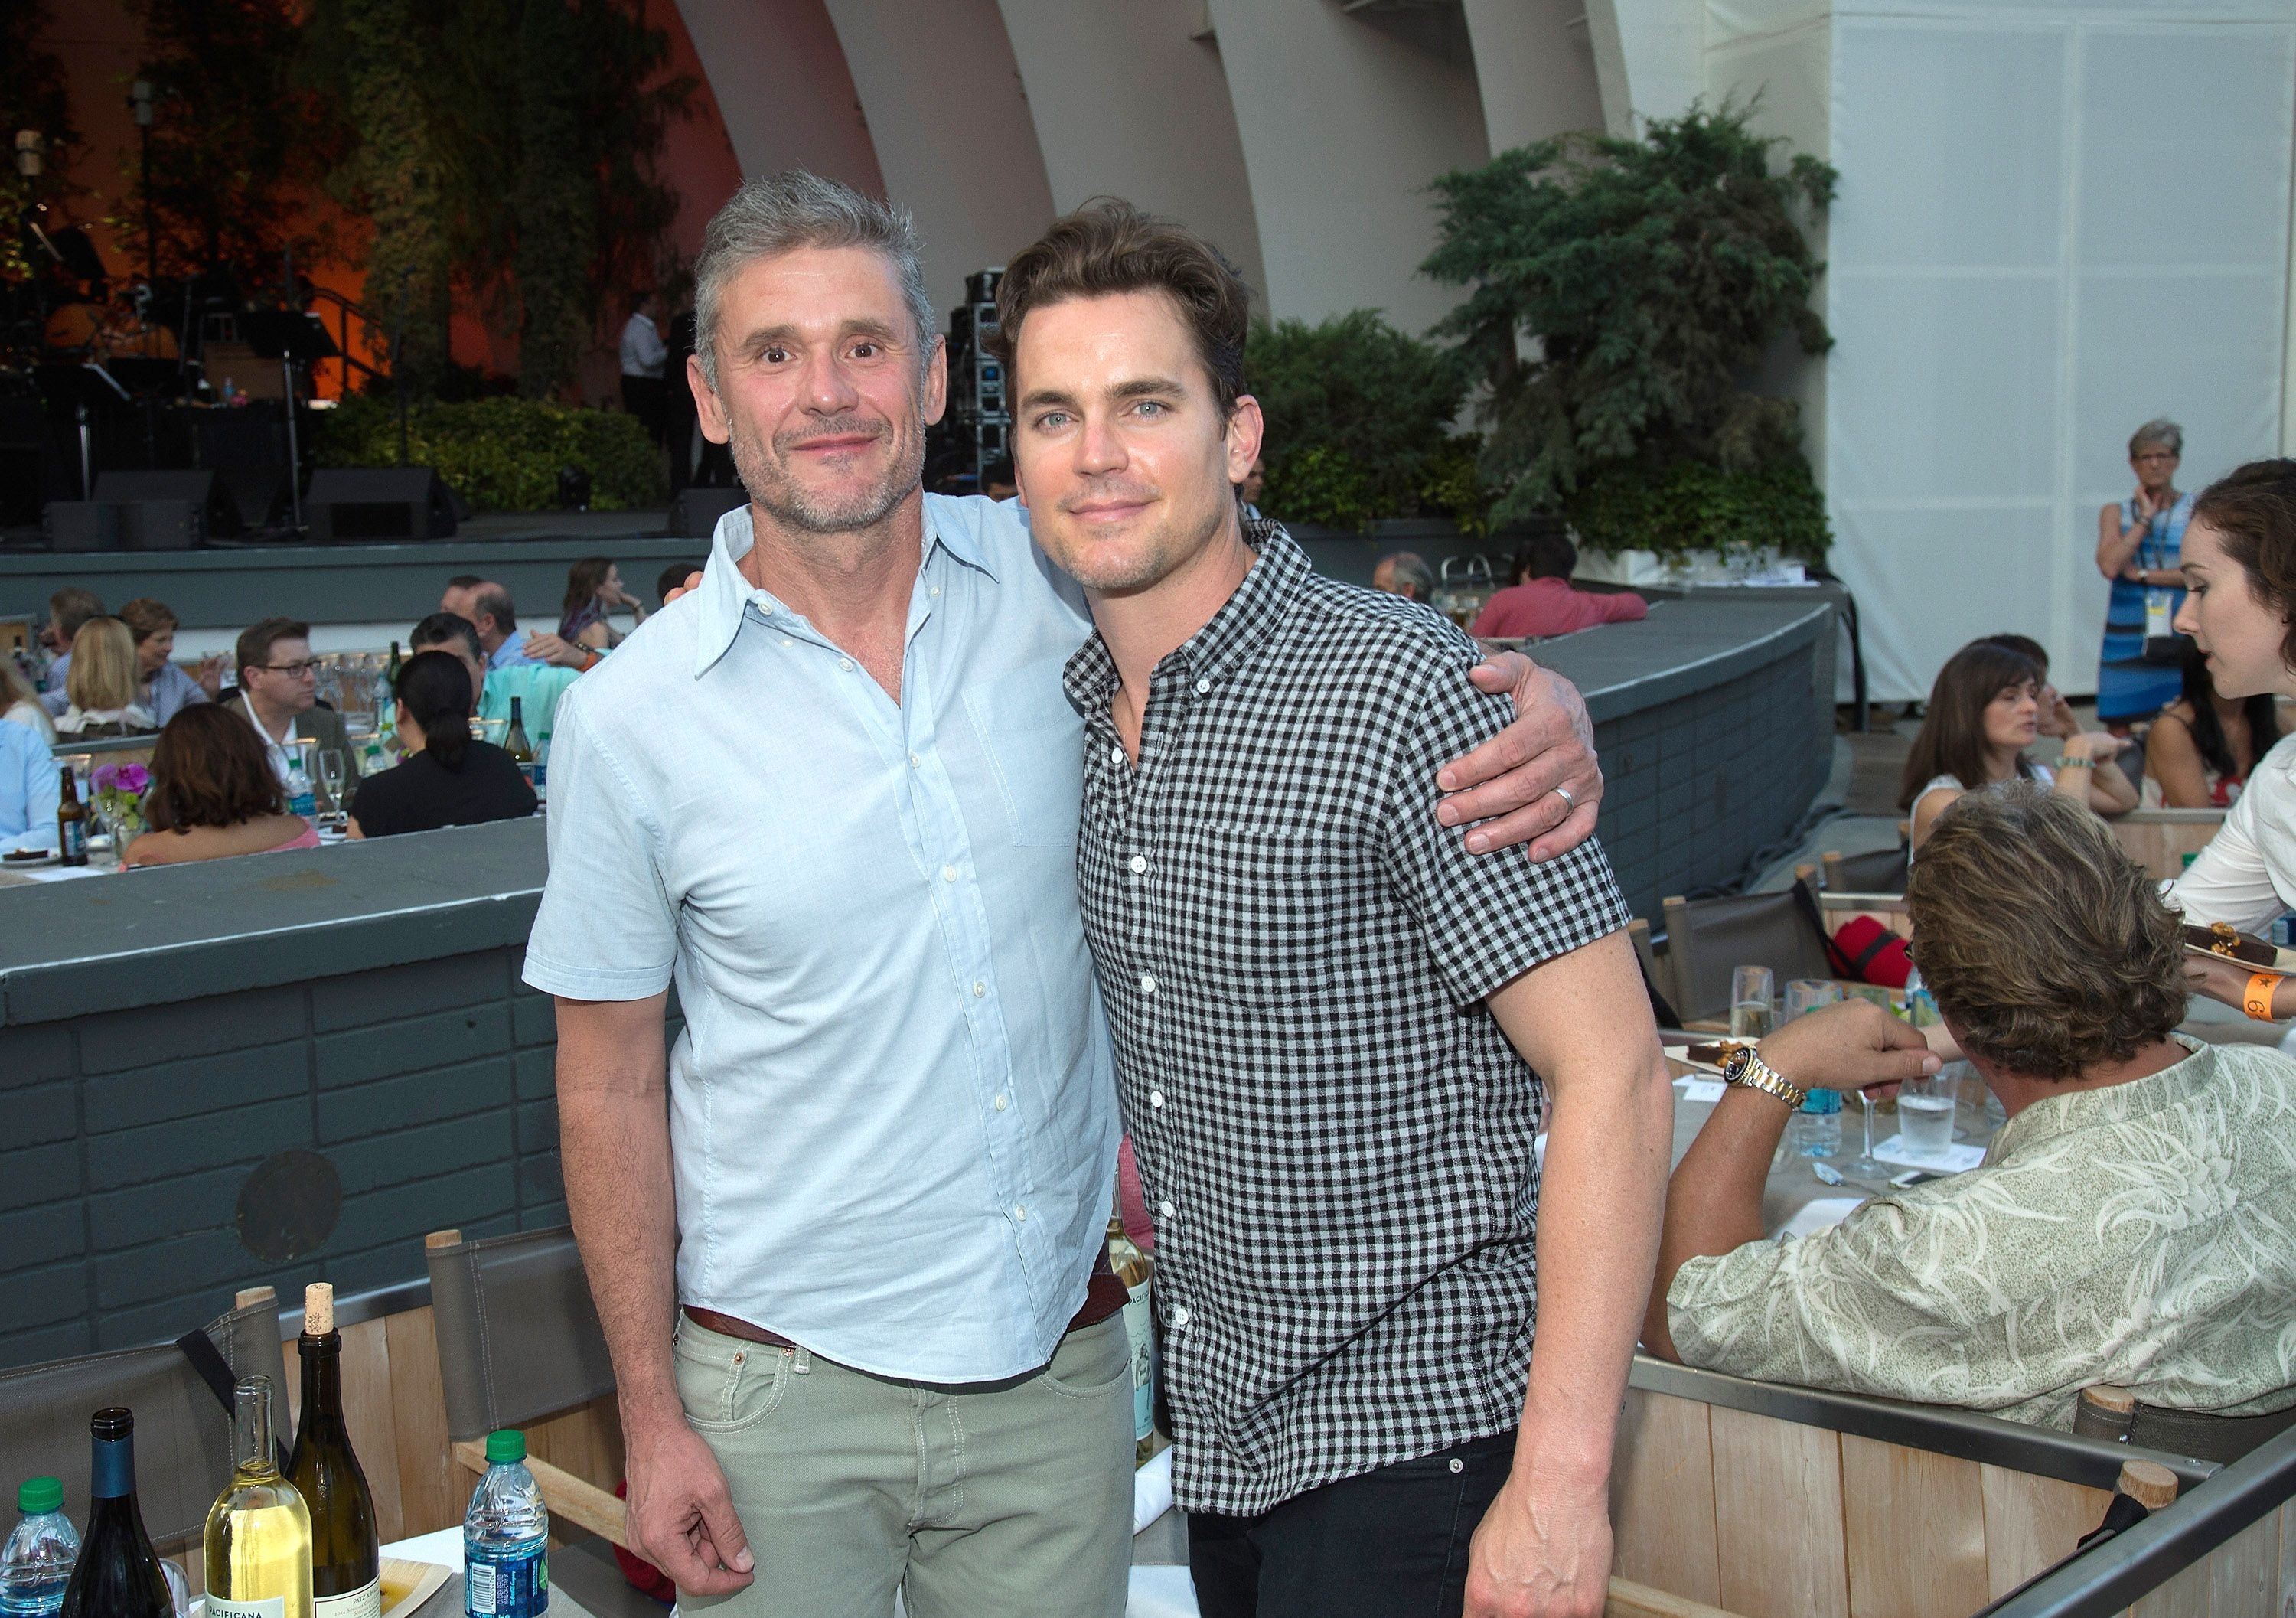 Simon Halls and Matt Bomer during the Hollywood Bowl opening night at the Hollywood Bowl on June 18, 2016, in Hollywood, California. | Source: Getty Images